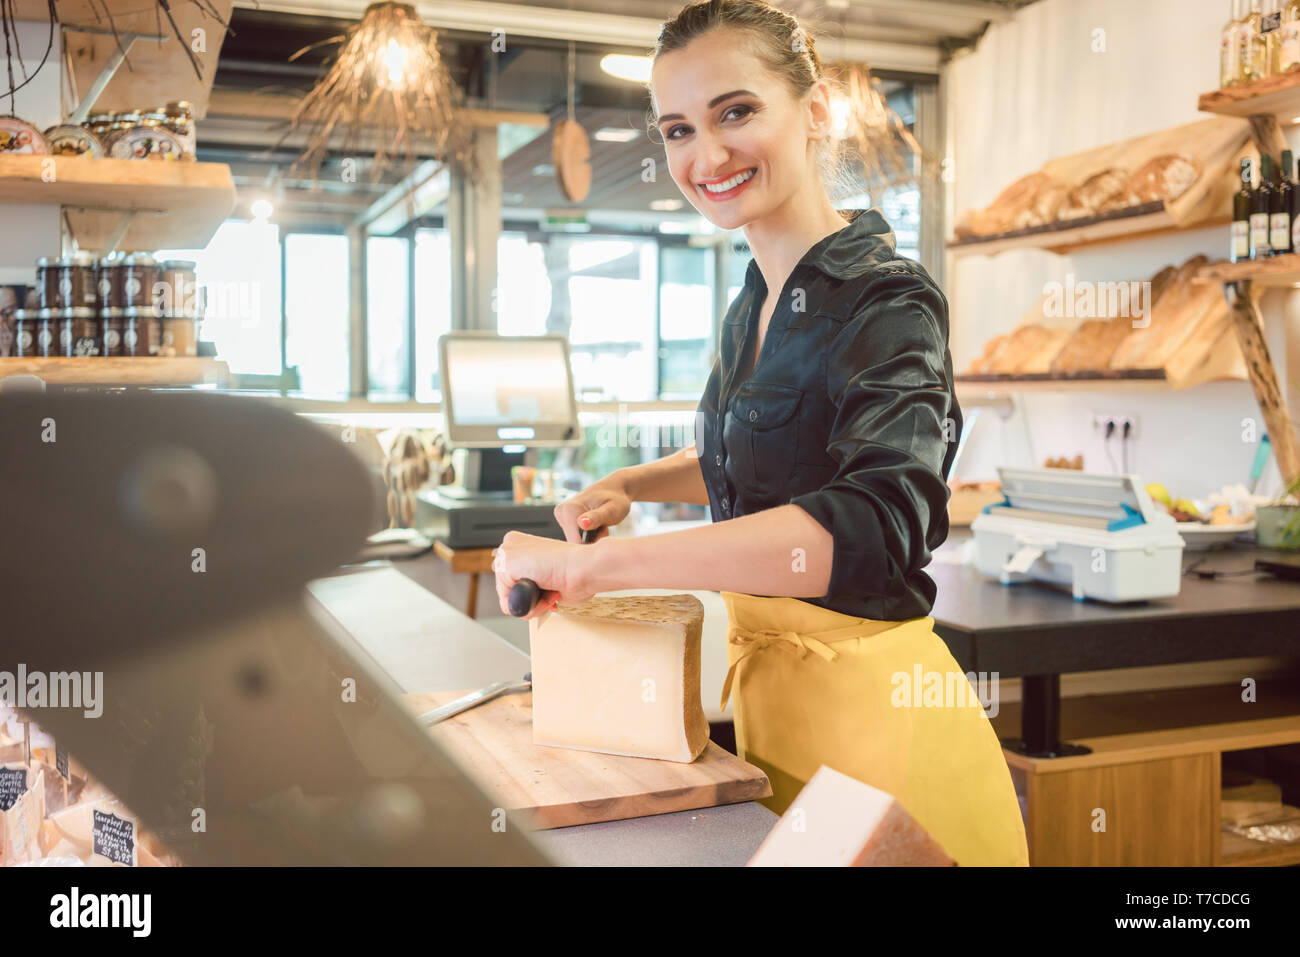 Shop clerk in deli cutting cheese Stock Photo